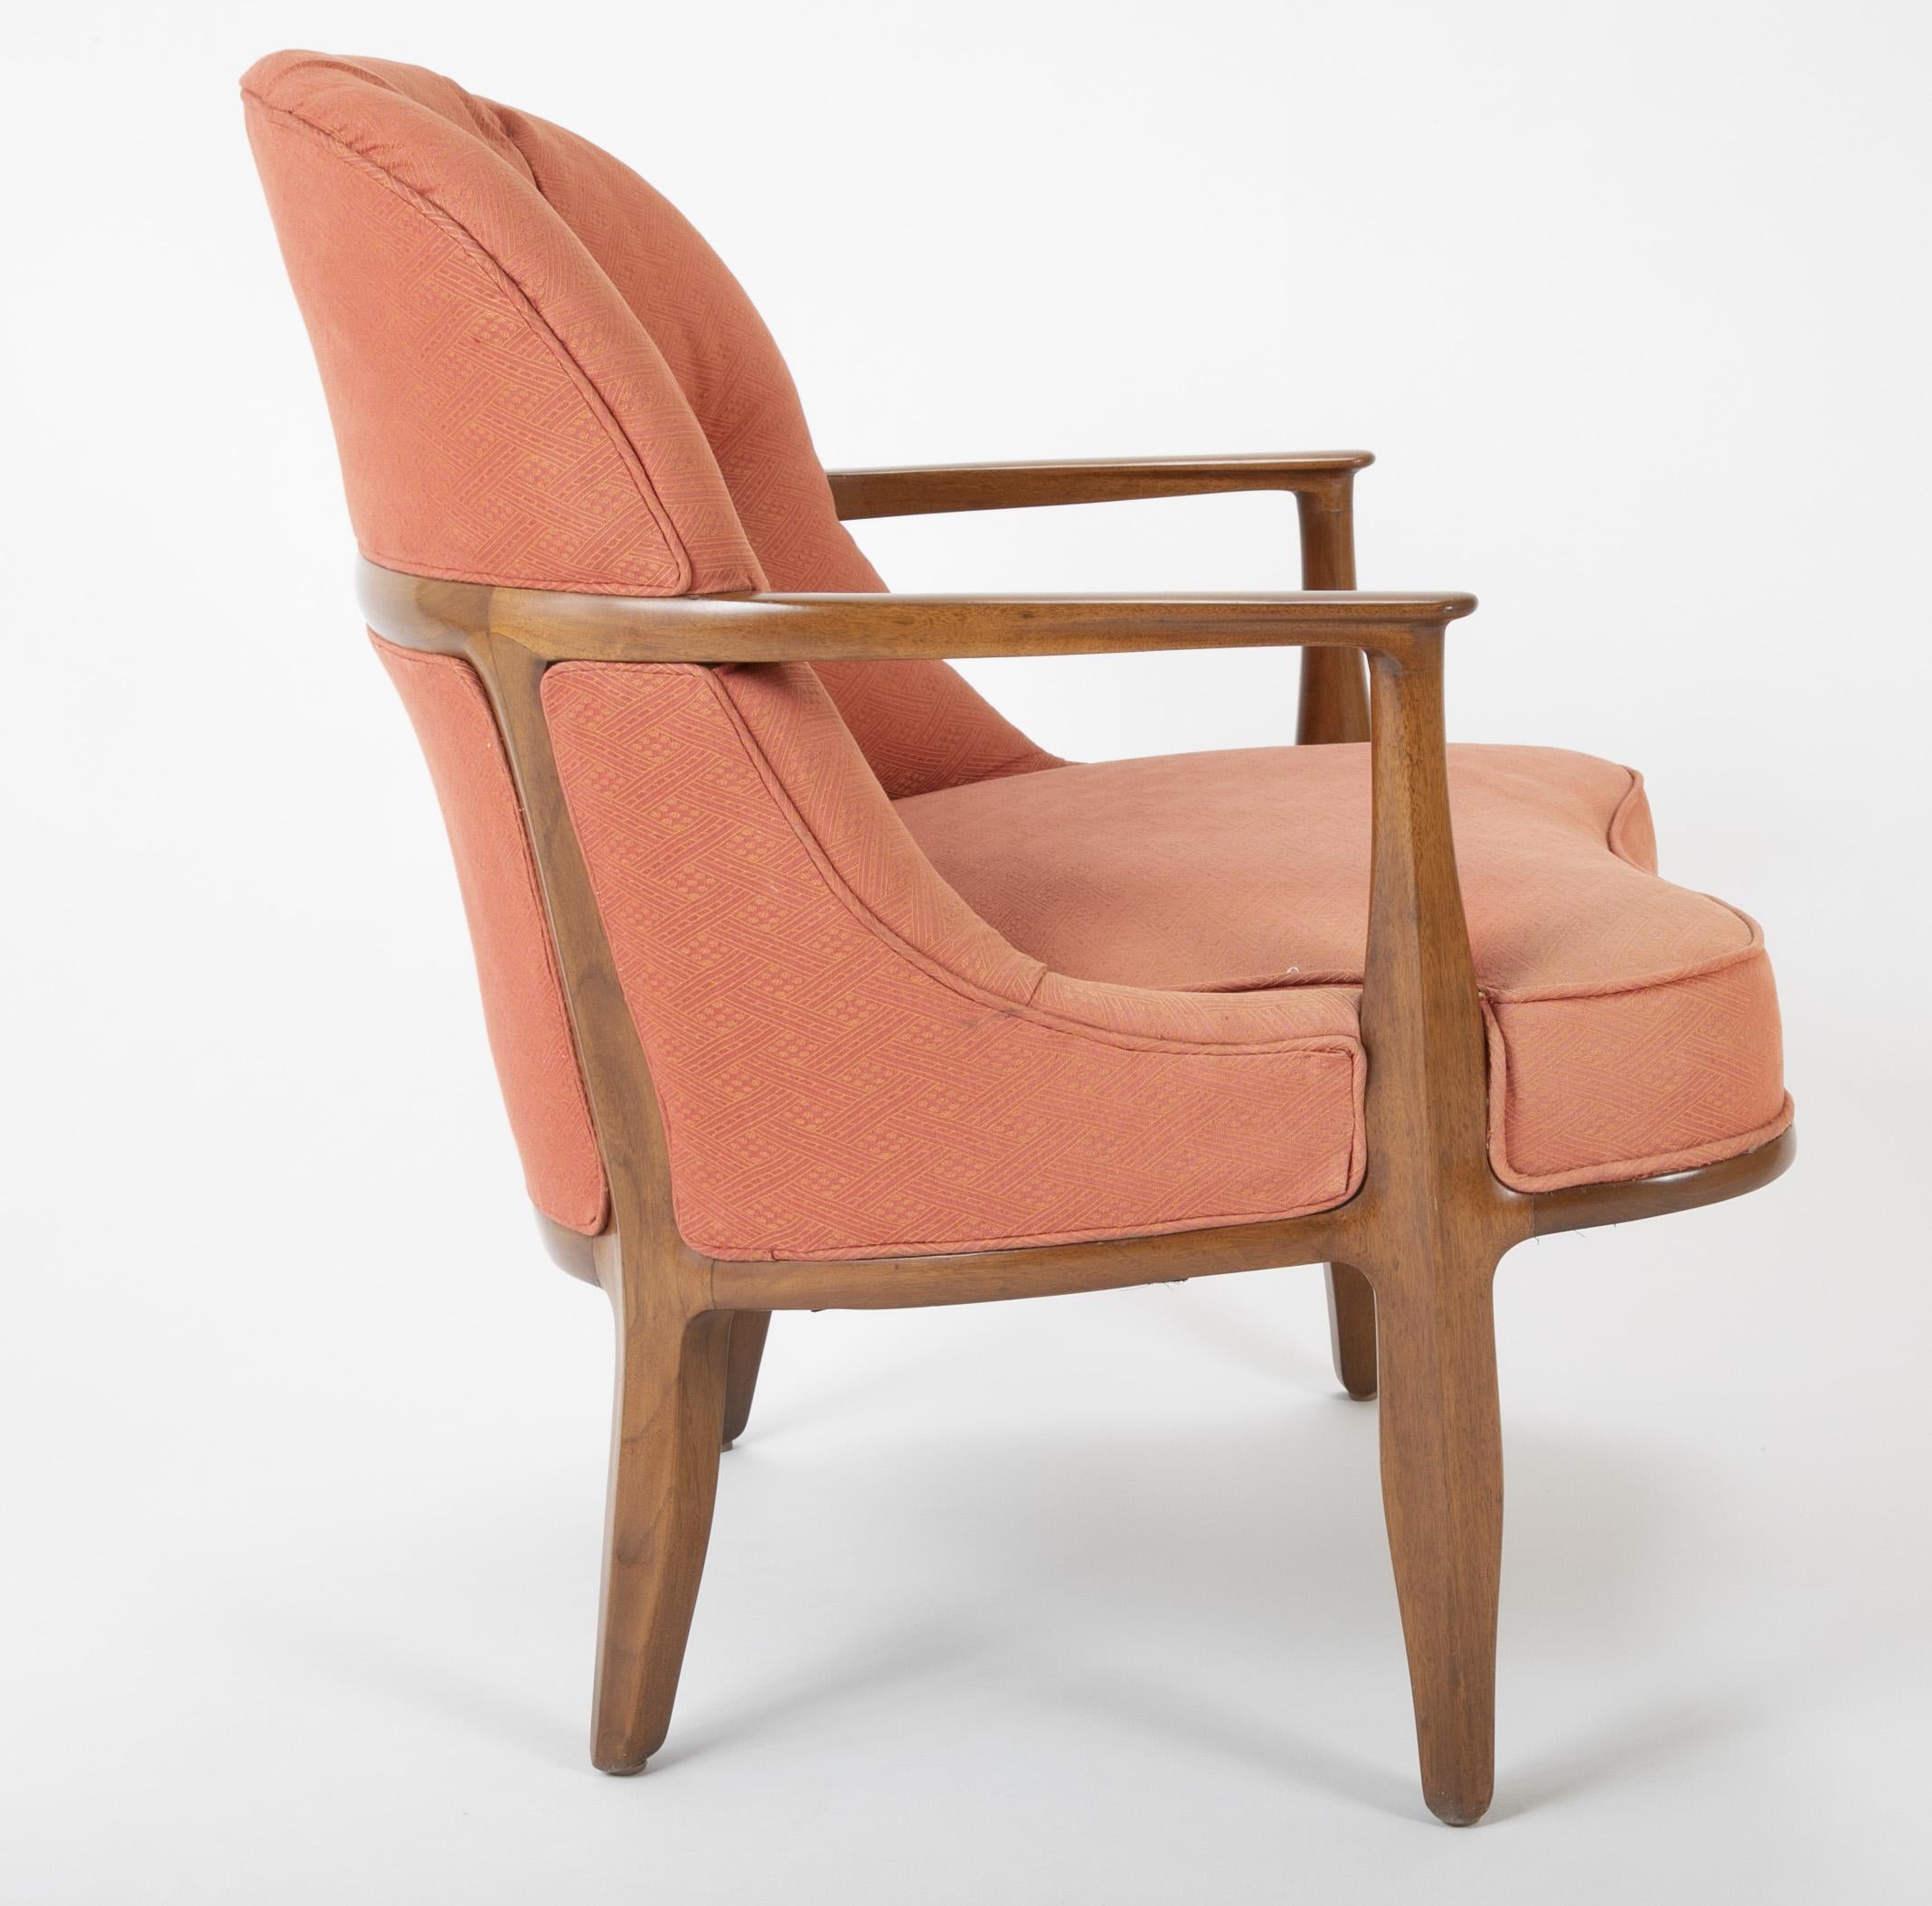 Mid-20th Century Pair of Edward Wormley Walnut Armchairs for The Janus Collection of Dunbar